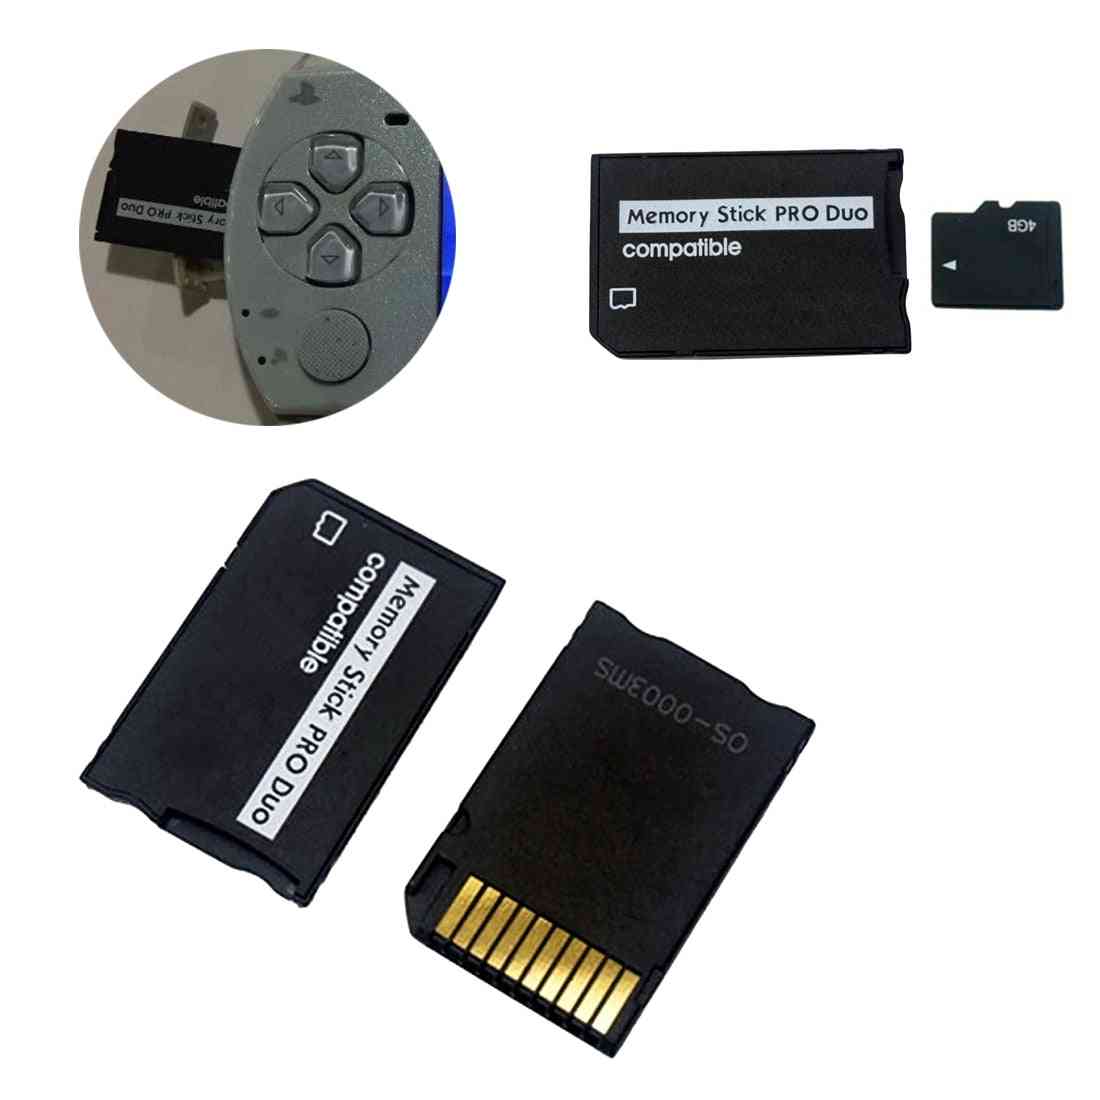 Micro Sd To Memory Card Adapter Stick For Psp